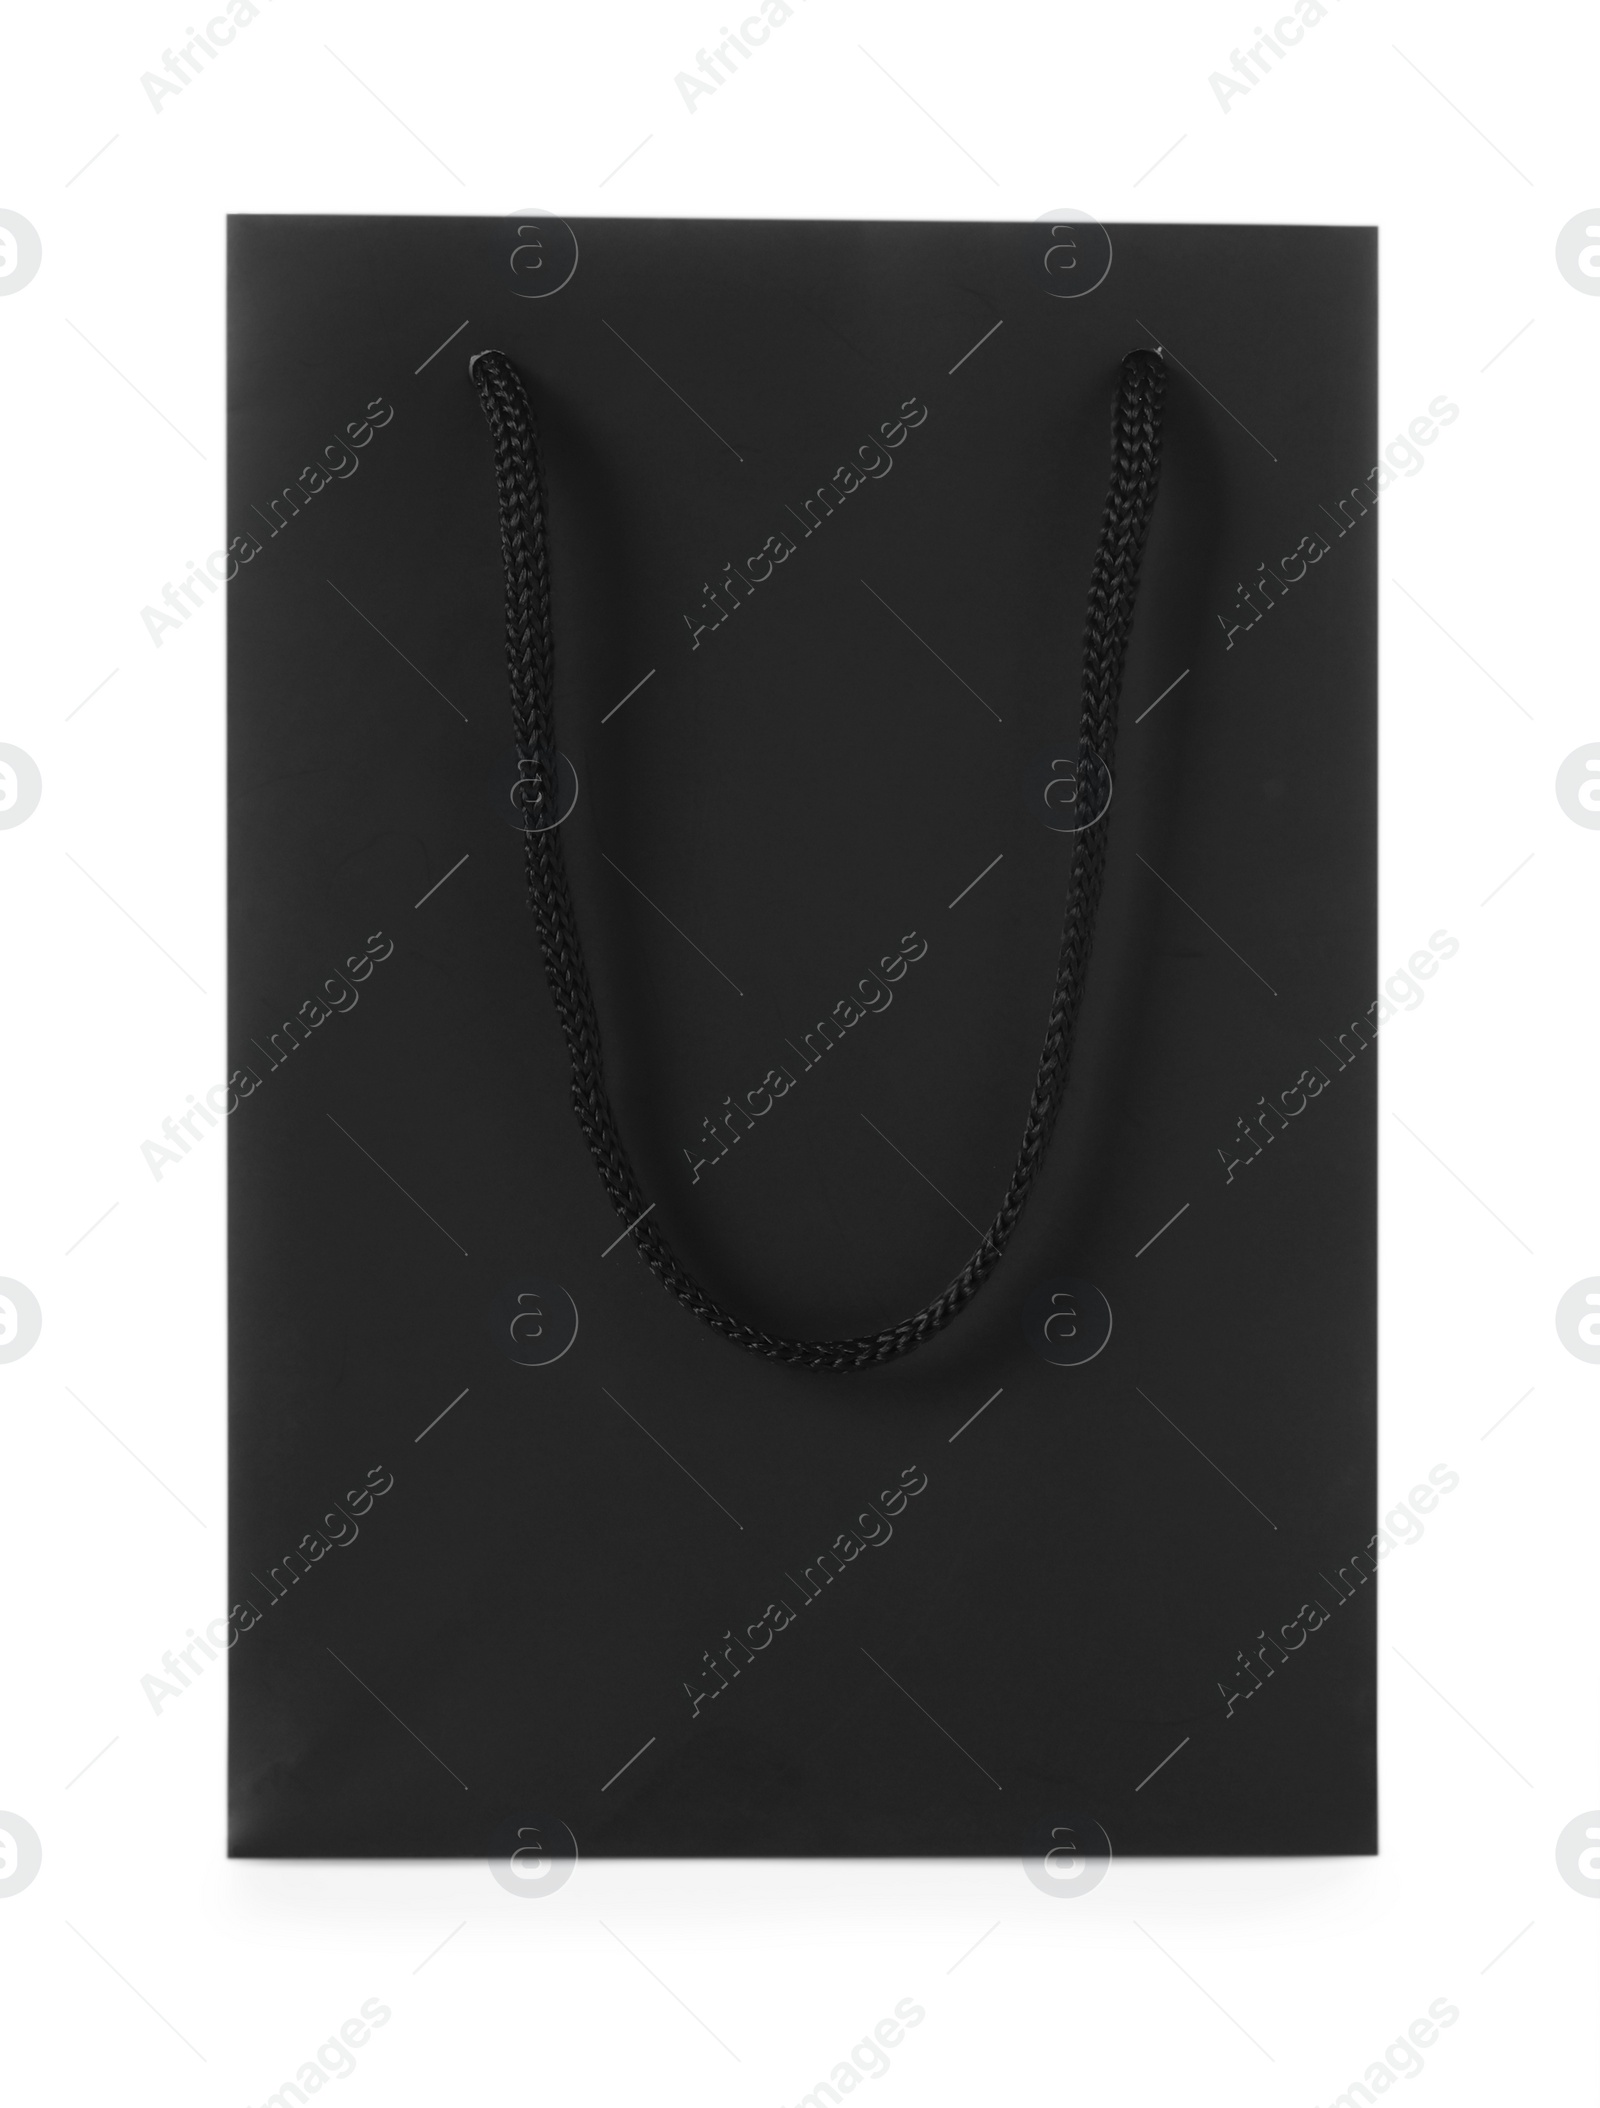 Photo of One black paper bag isolated on white